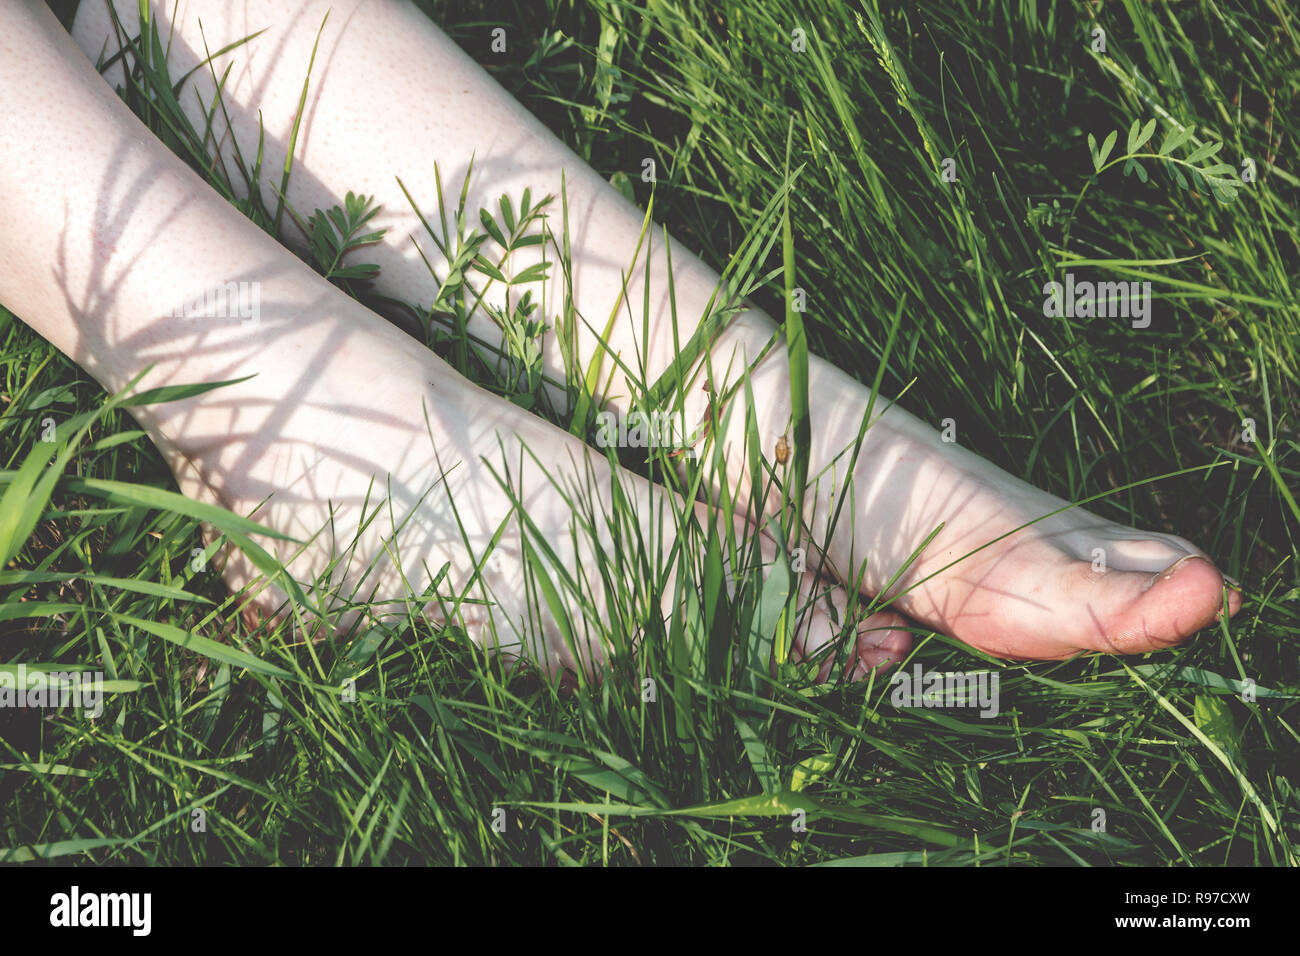 Legs of the girl with very light skin and with natural nails on toes close-up. Stock Photo